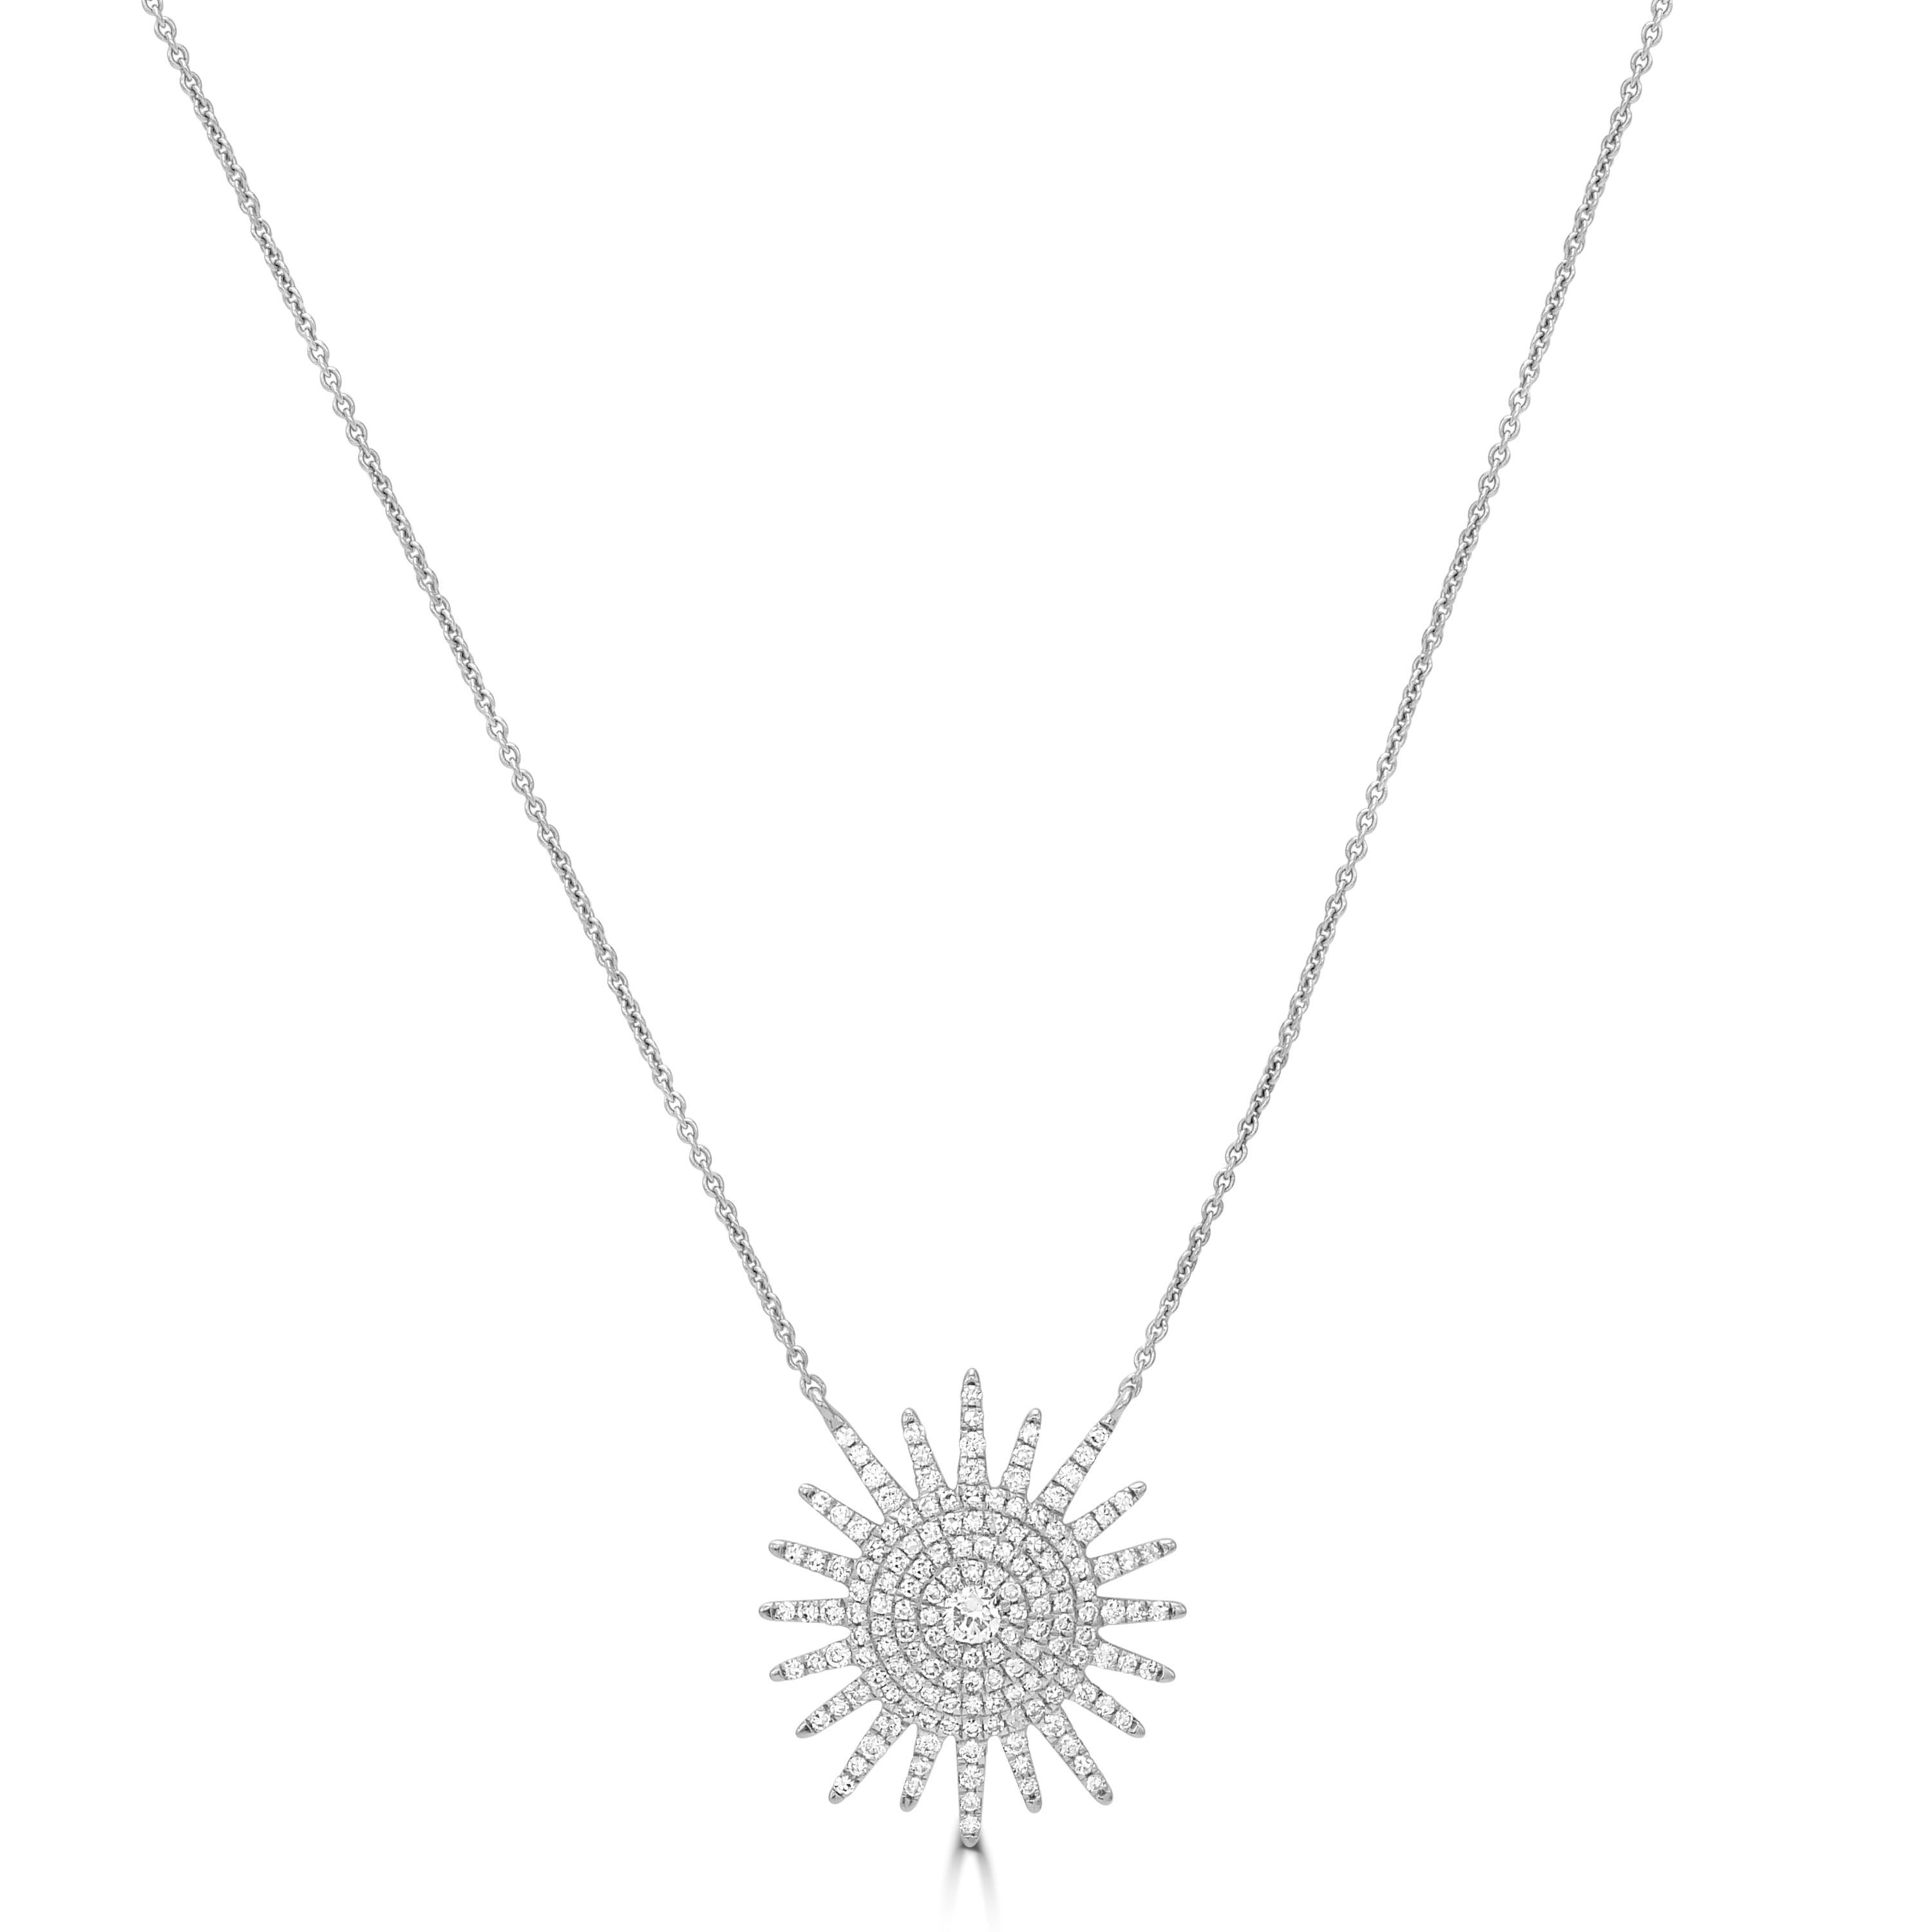 You're sure to shine whenever you wear this Luxle 14k gold diamond starburst pendant. Featuring 0.50 carats of round full-cut diamonds in starburst pendant set in 14K white gold. This pendant necklace, which hangs from a gold rolo chain, is stunning